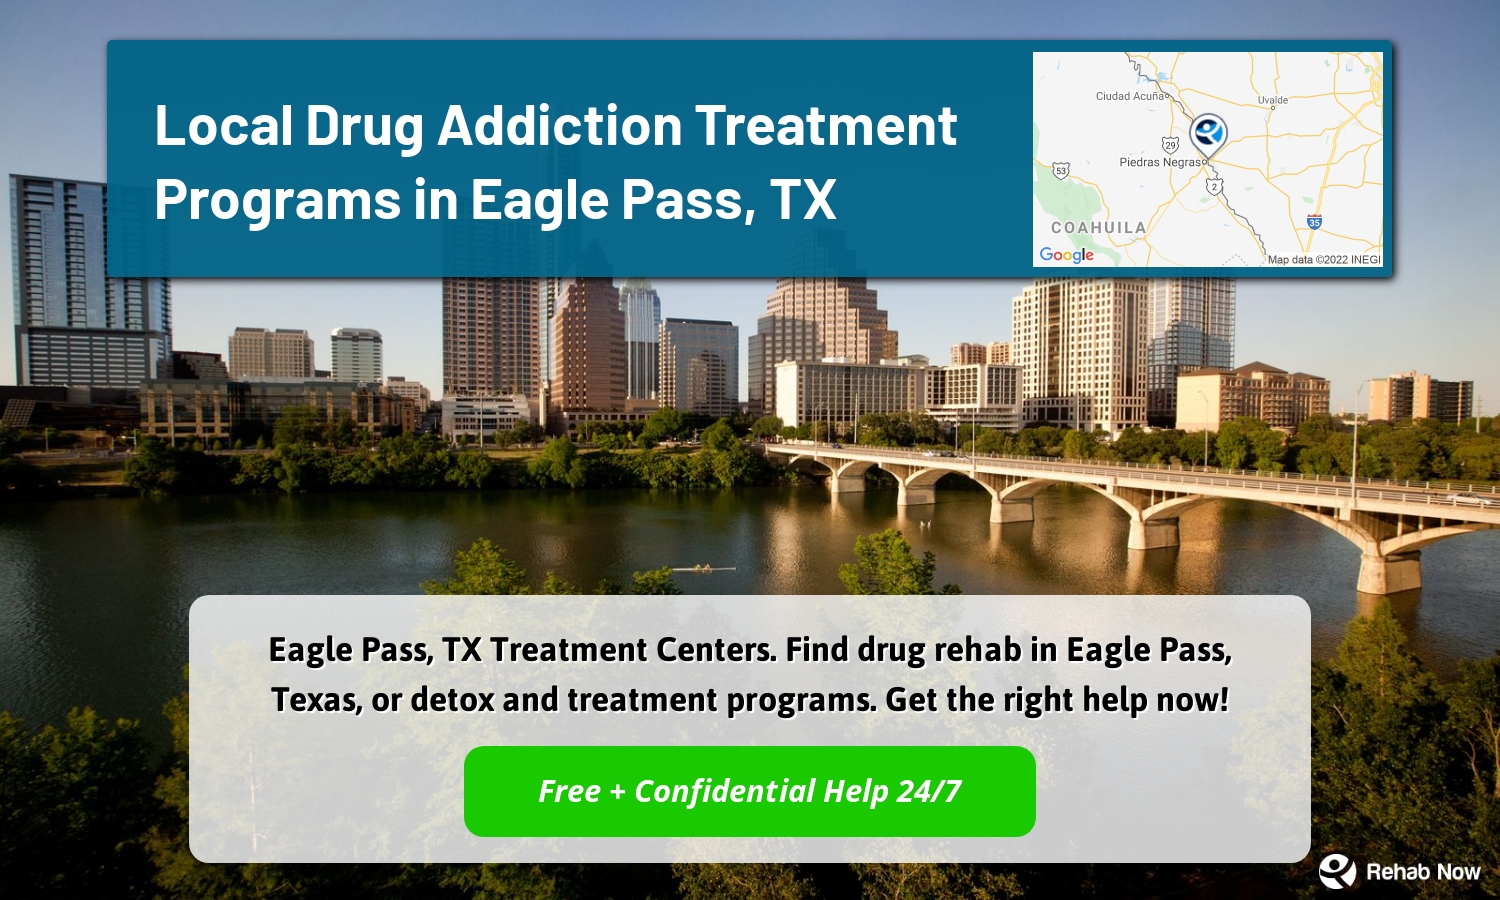 Eagle Pass, TX Treatment Centers. Find drug rehab in Eagle Pass, Texas, or detox and treatment programs. Get the right help now!